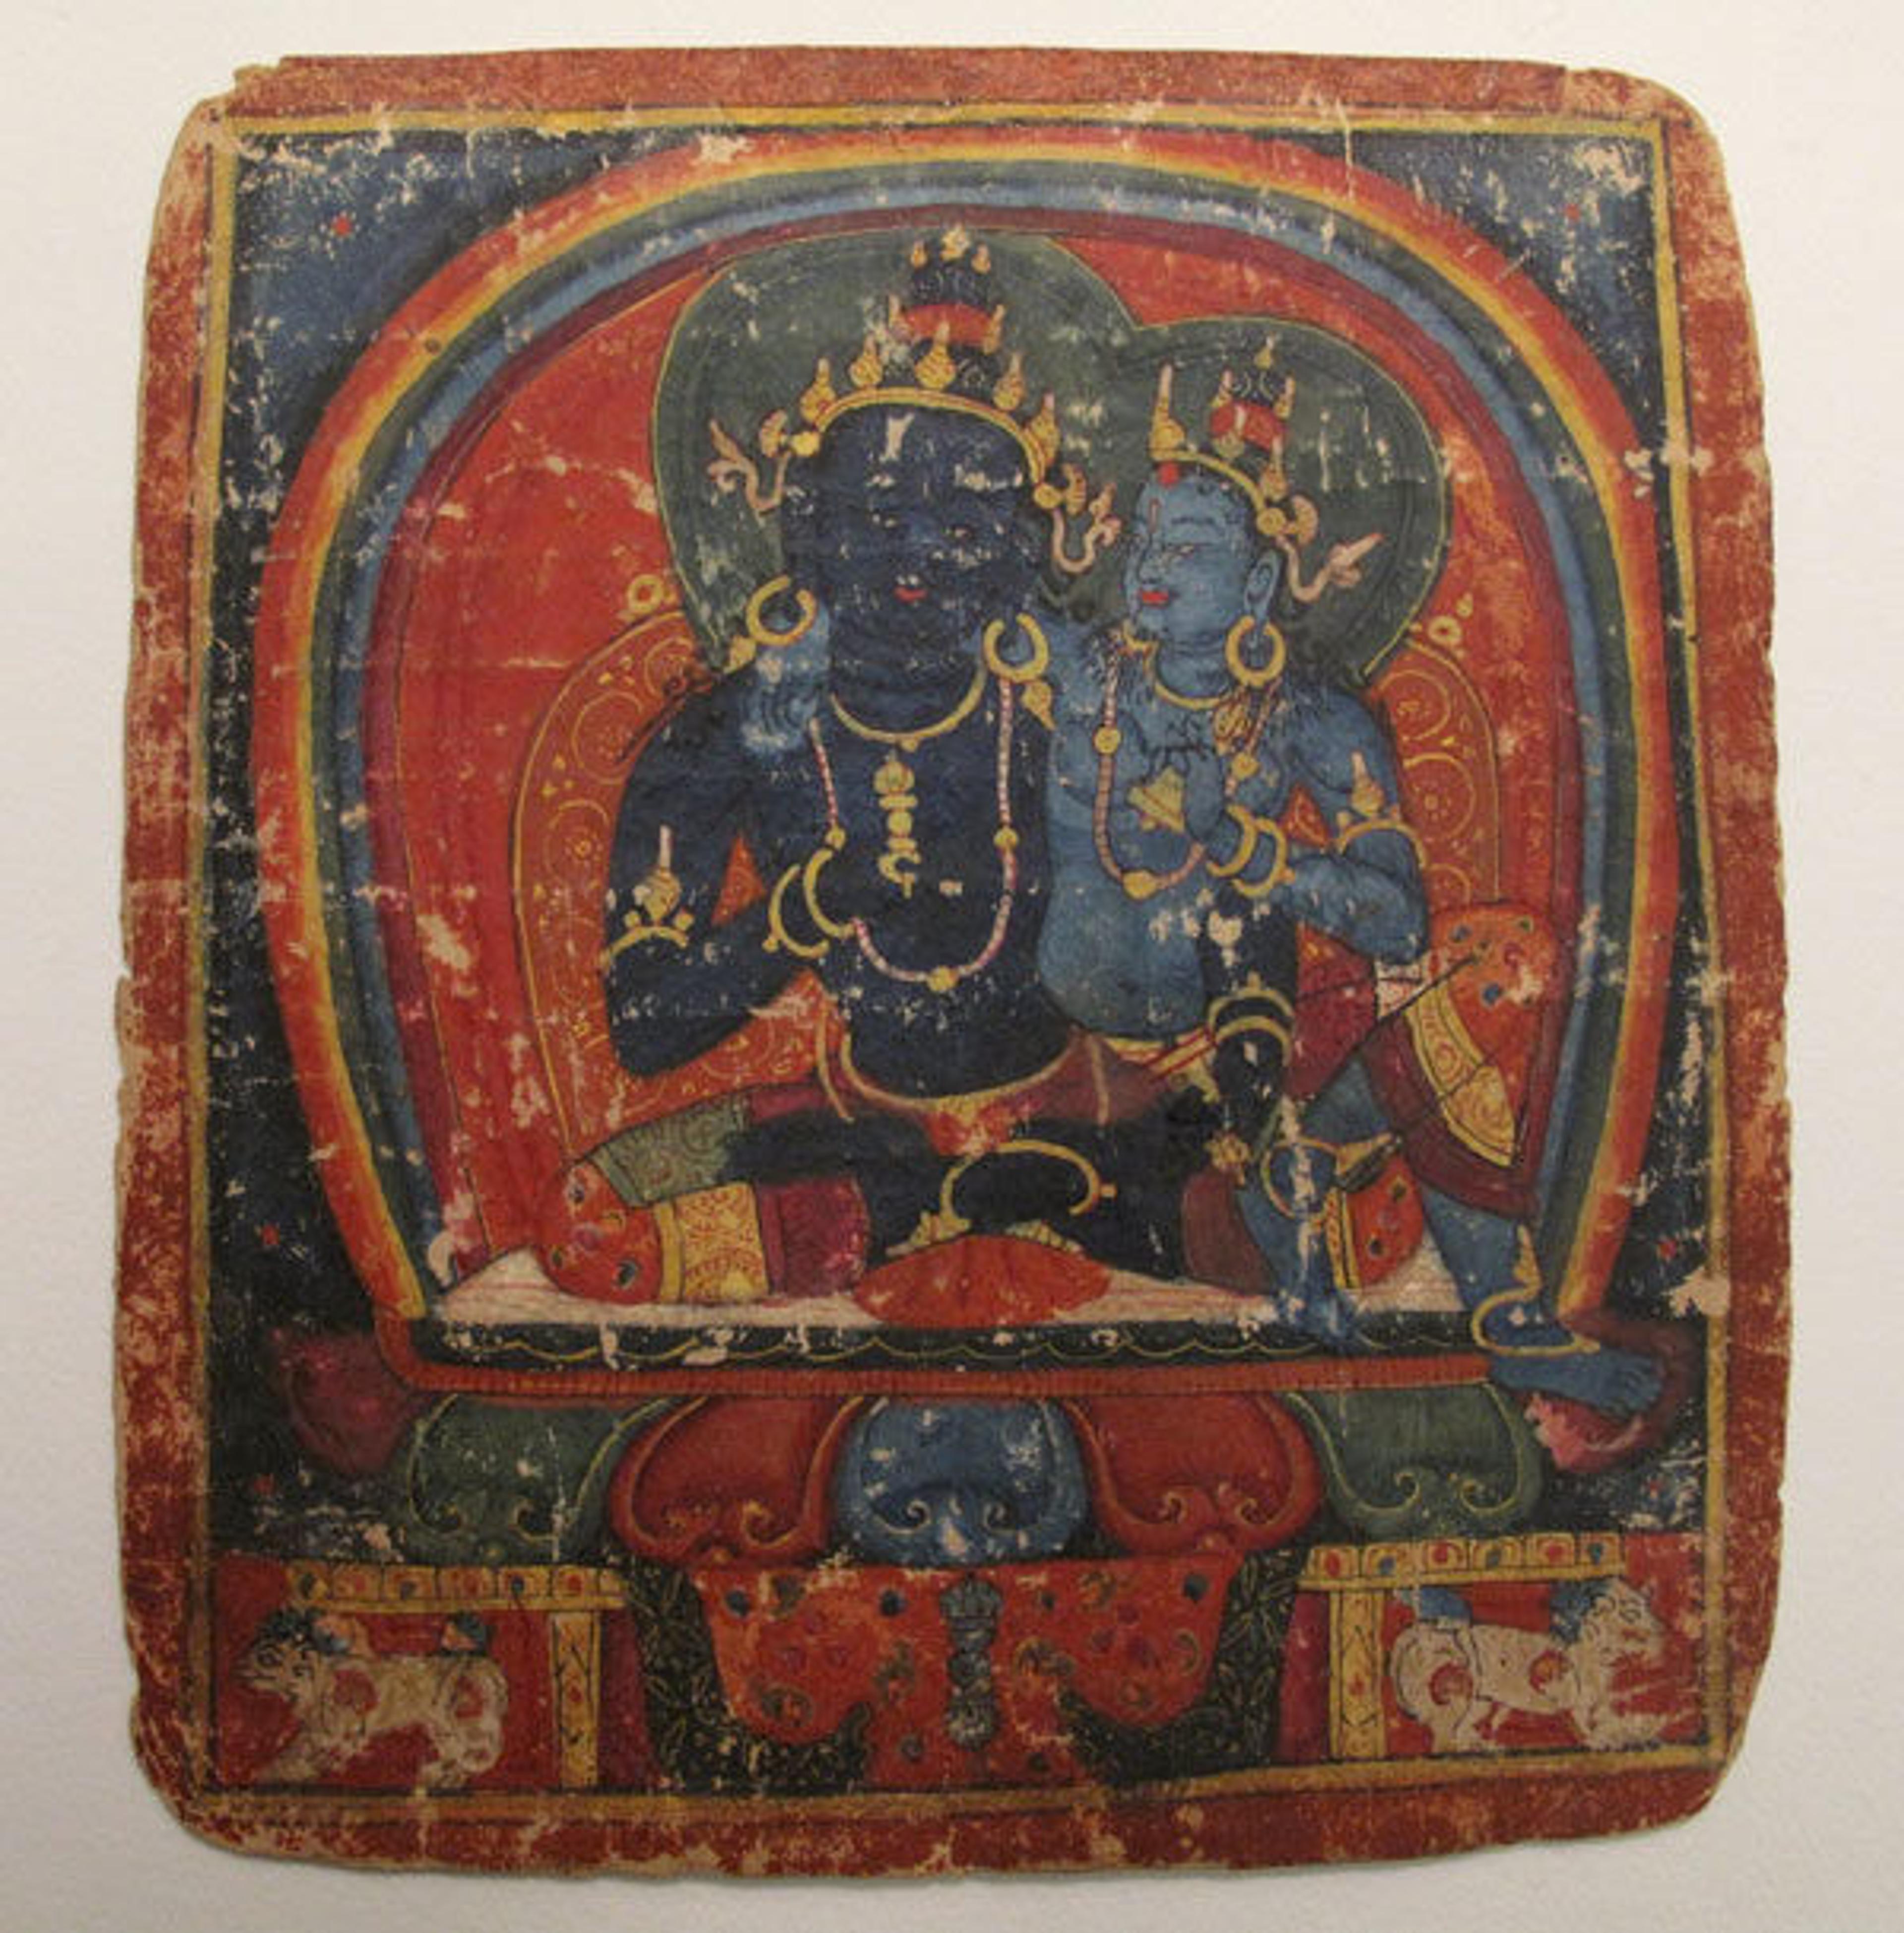 Initiation card, after conservation